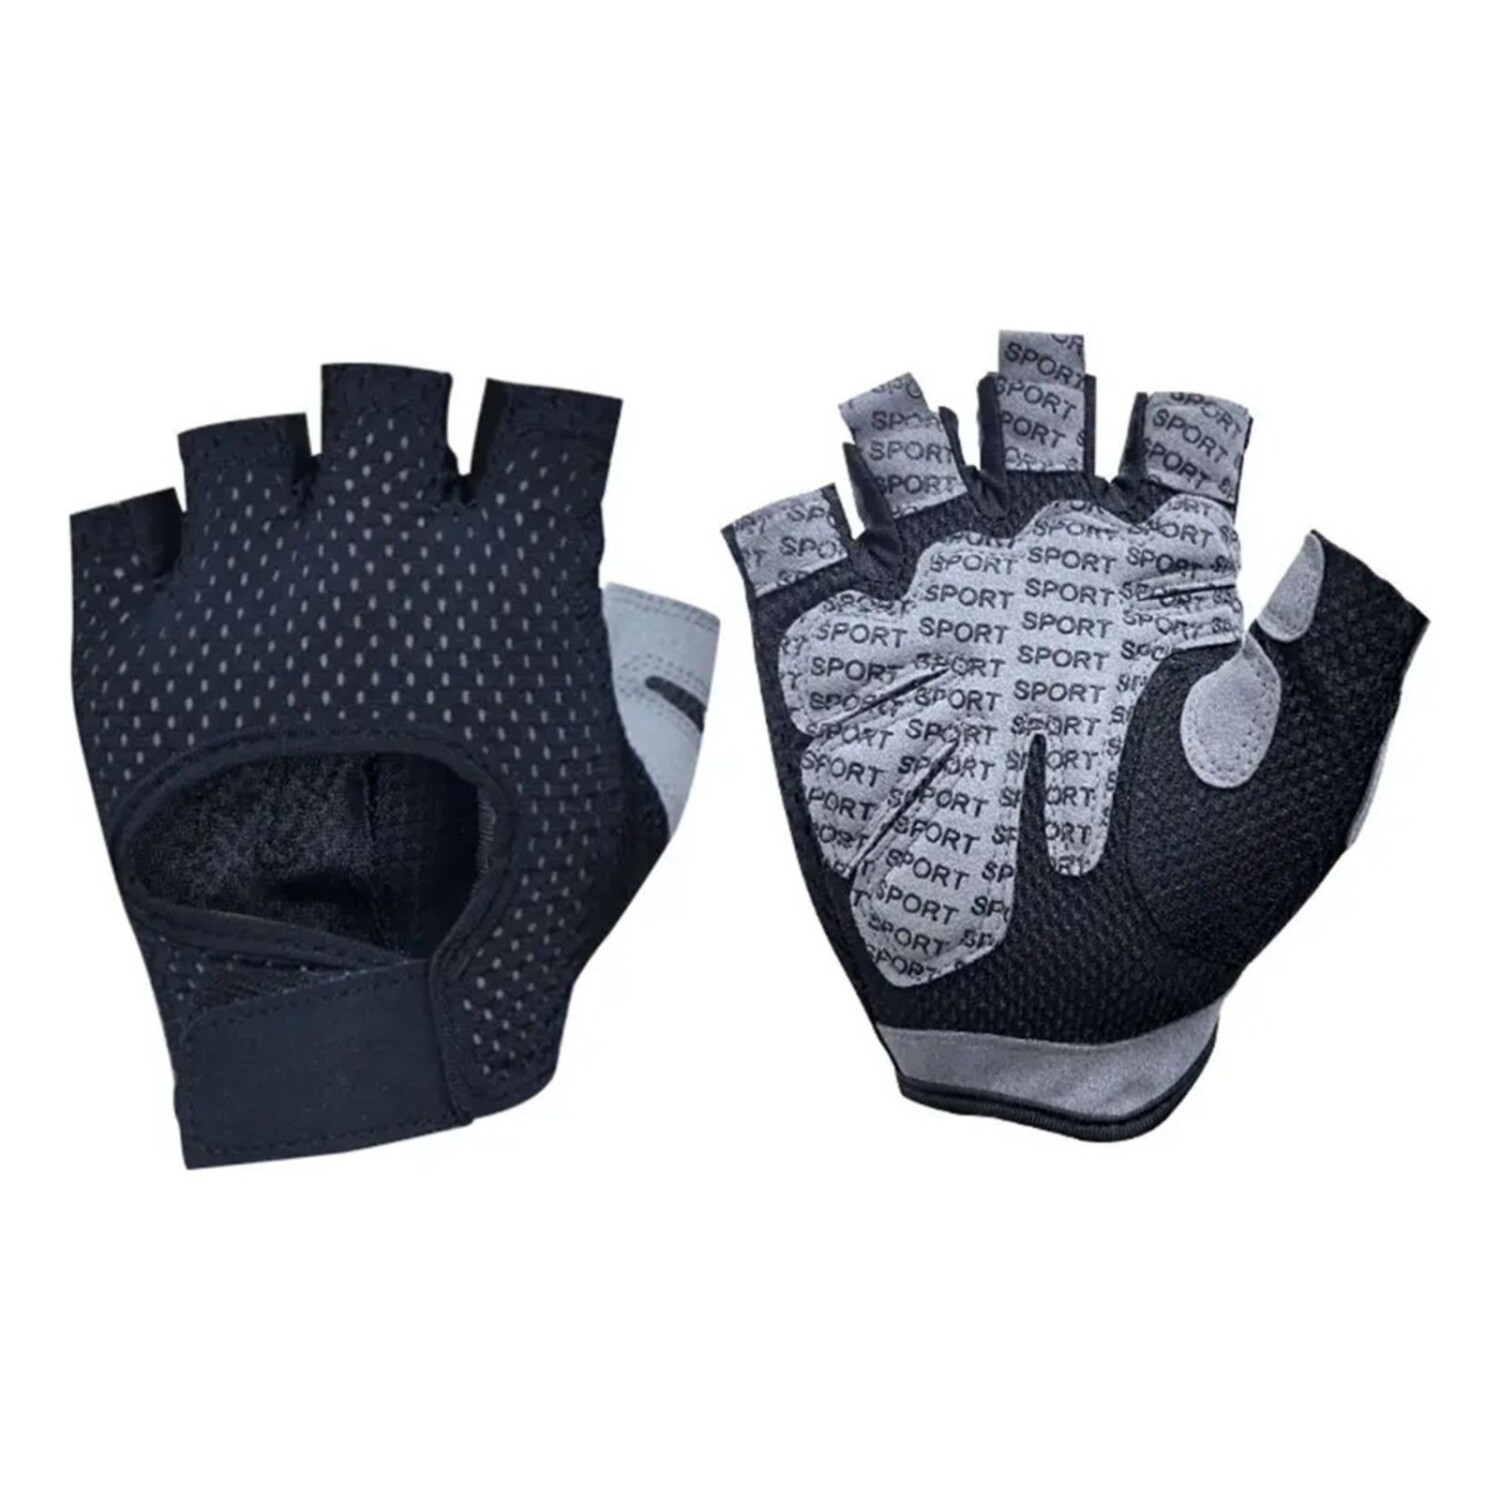 Guantes Fitness Crossfit Gym Gimnasio Musculacion Microperf